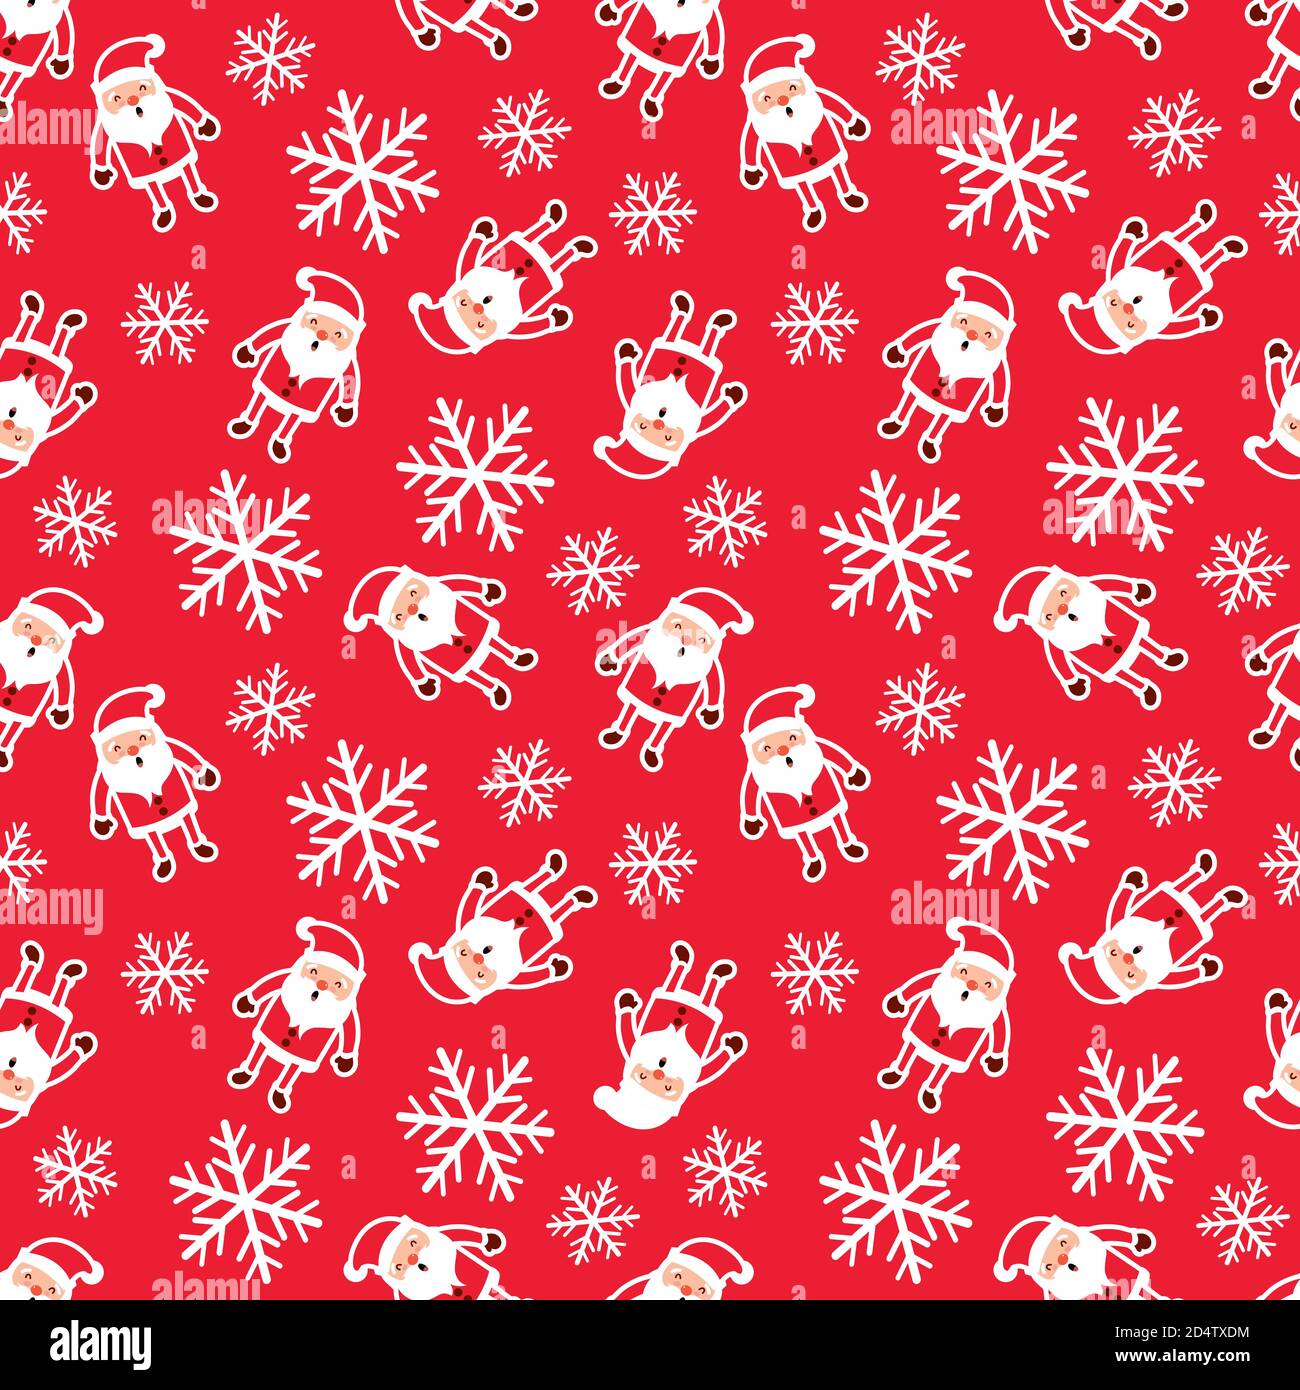 Vector seamless pattern of faces with Santa hats, mustache and beards. Various doodles Christmas Santa design elements. Holiday icons Stock Vector